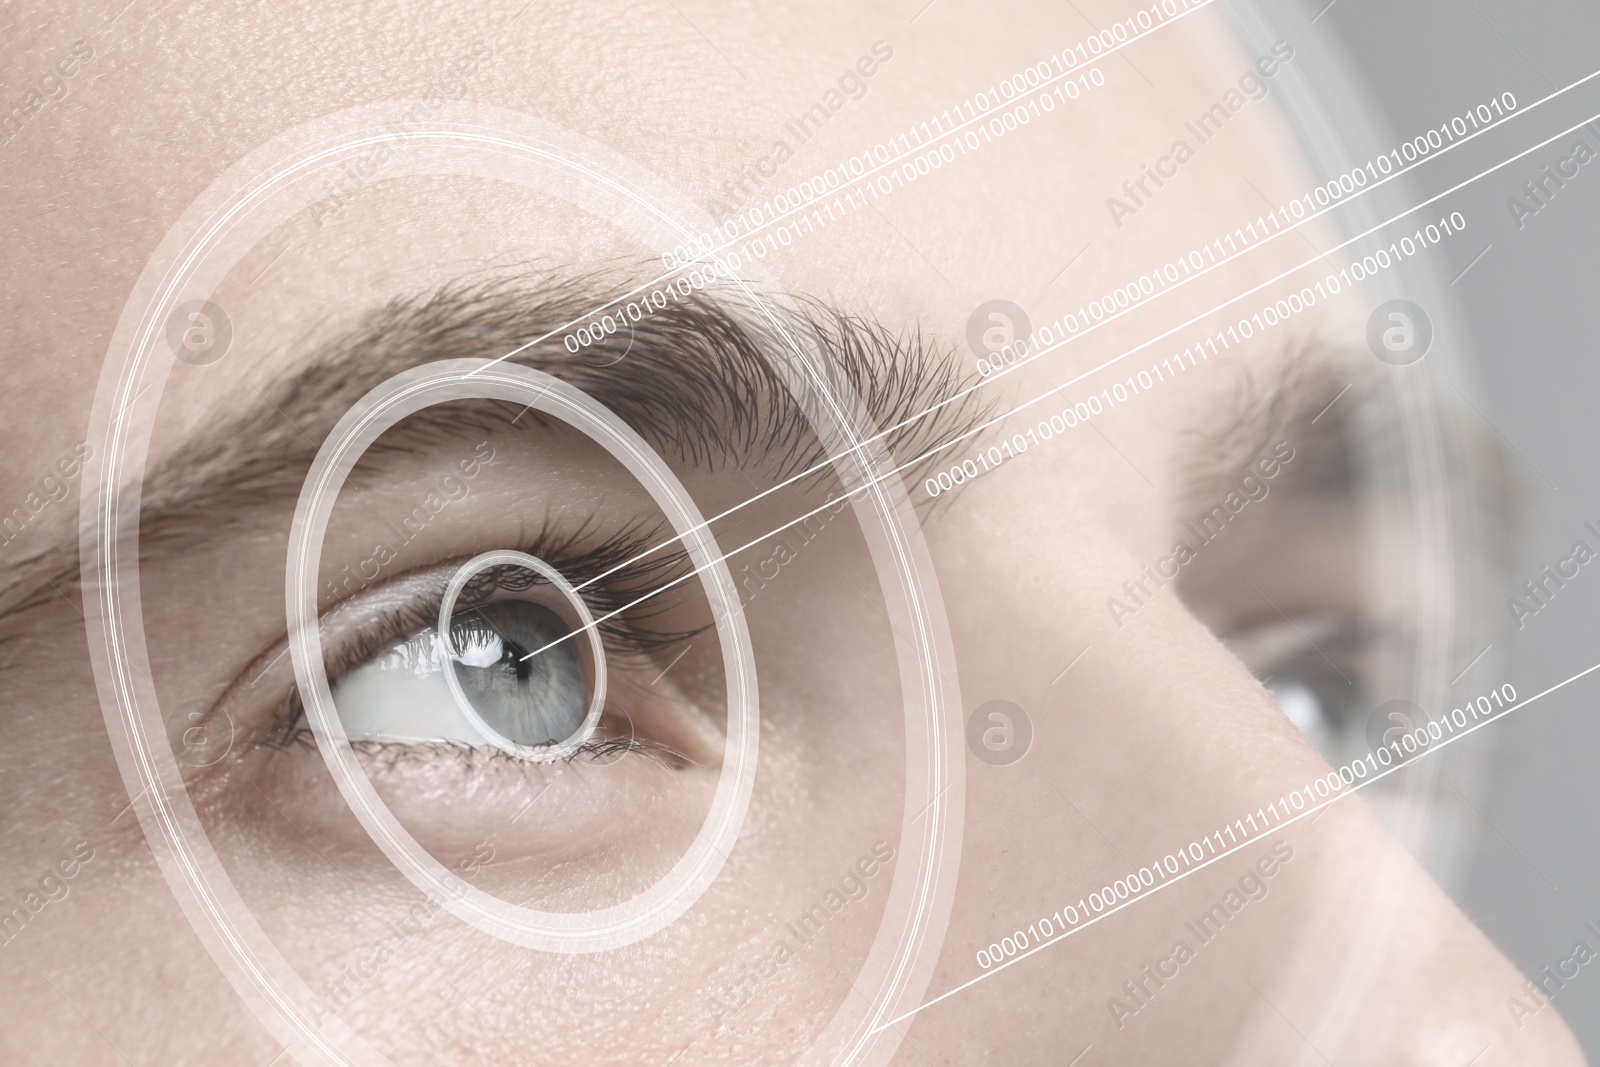 Image of Closeup view of man in process of scanning, focus on eye